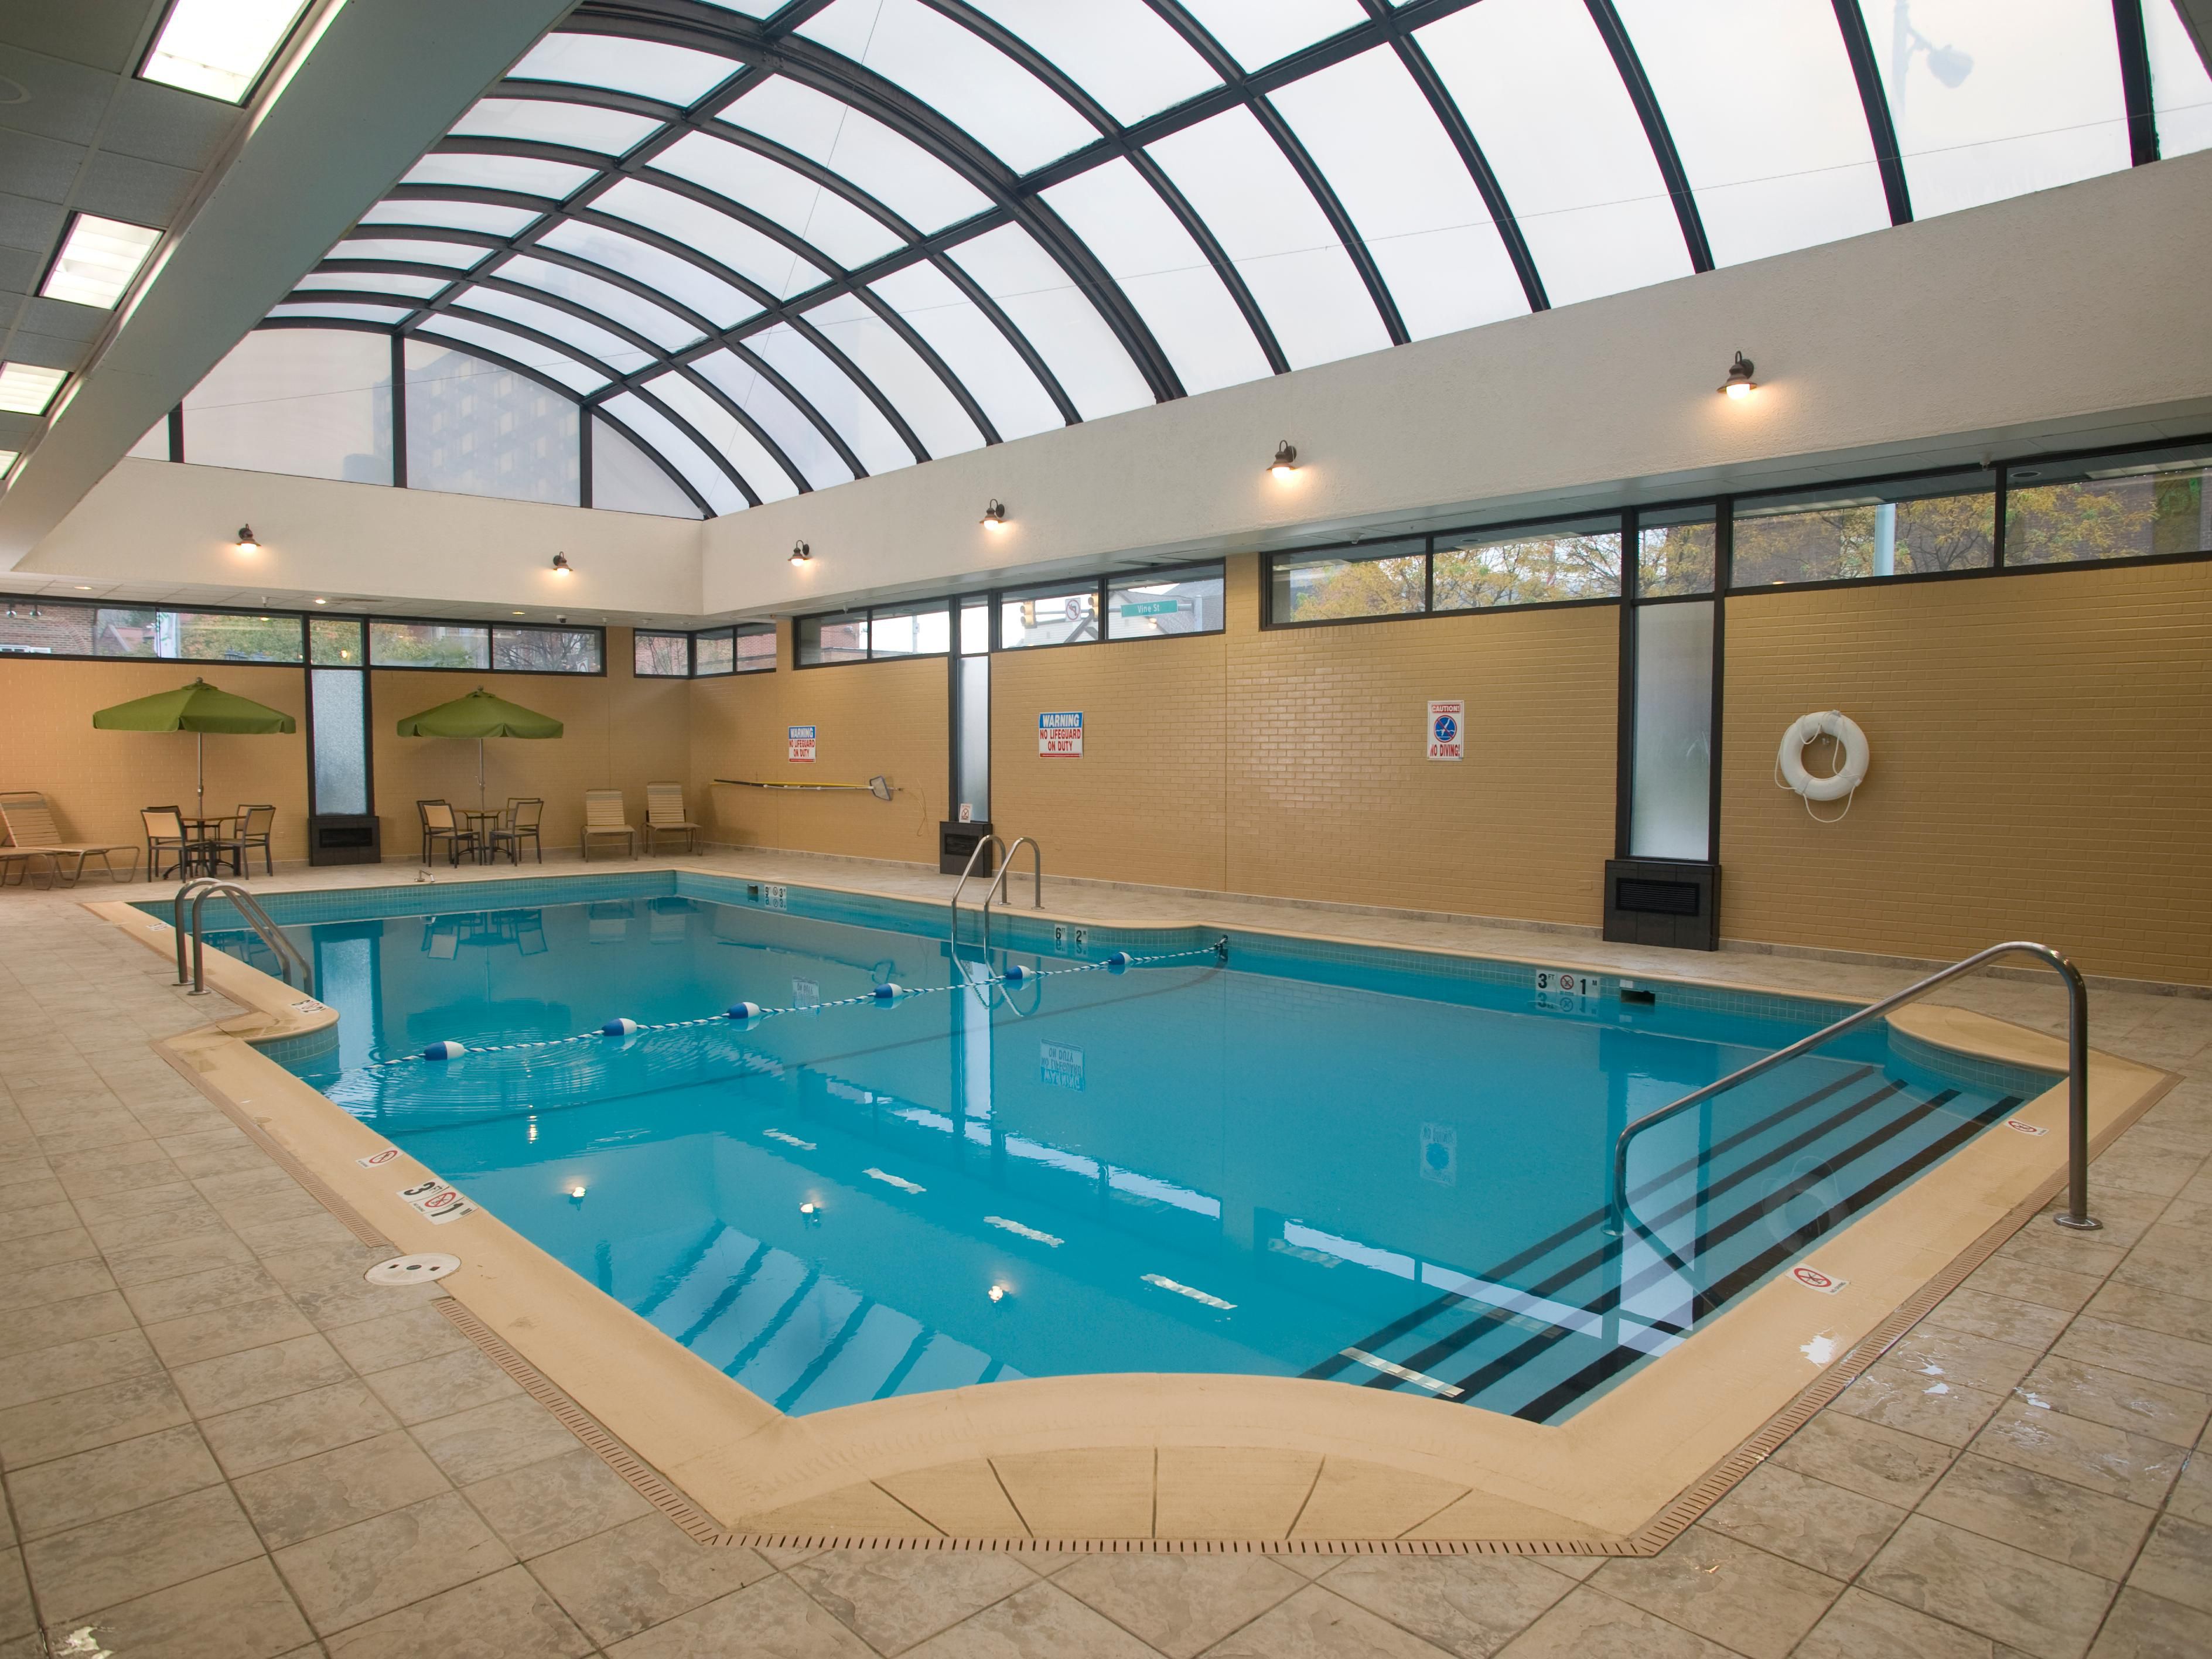 The colder temperatures are here! What better activity than taking a dip in our heated indoor pool? Make a reservation today!